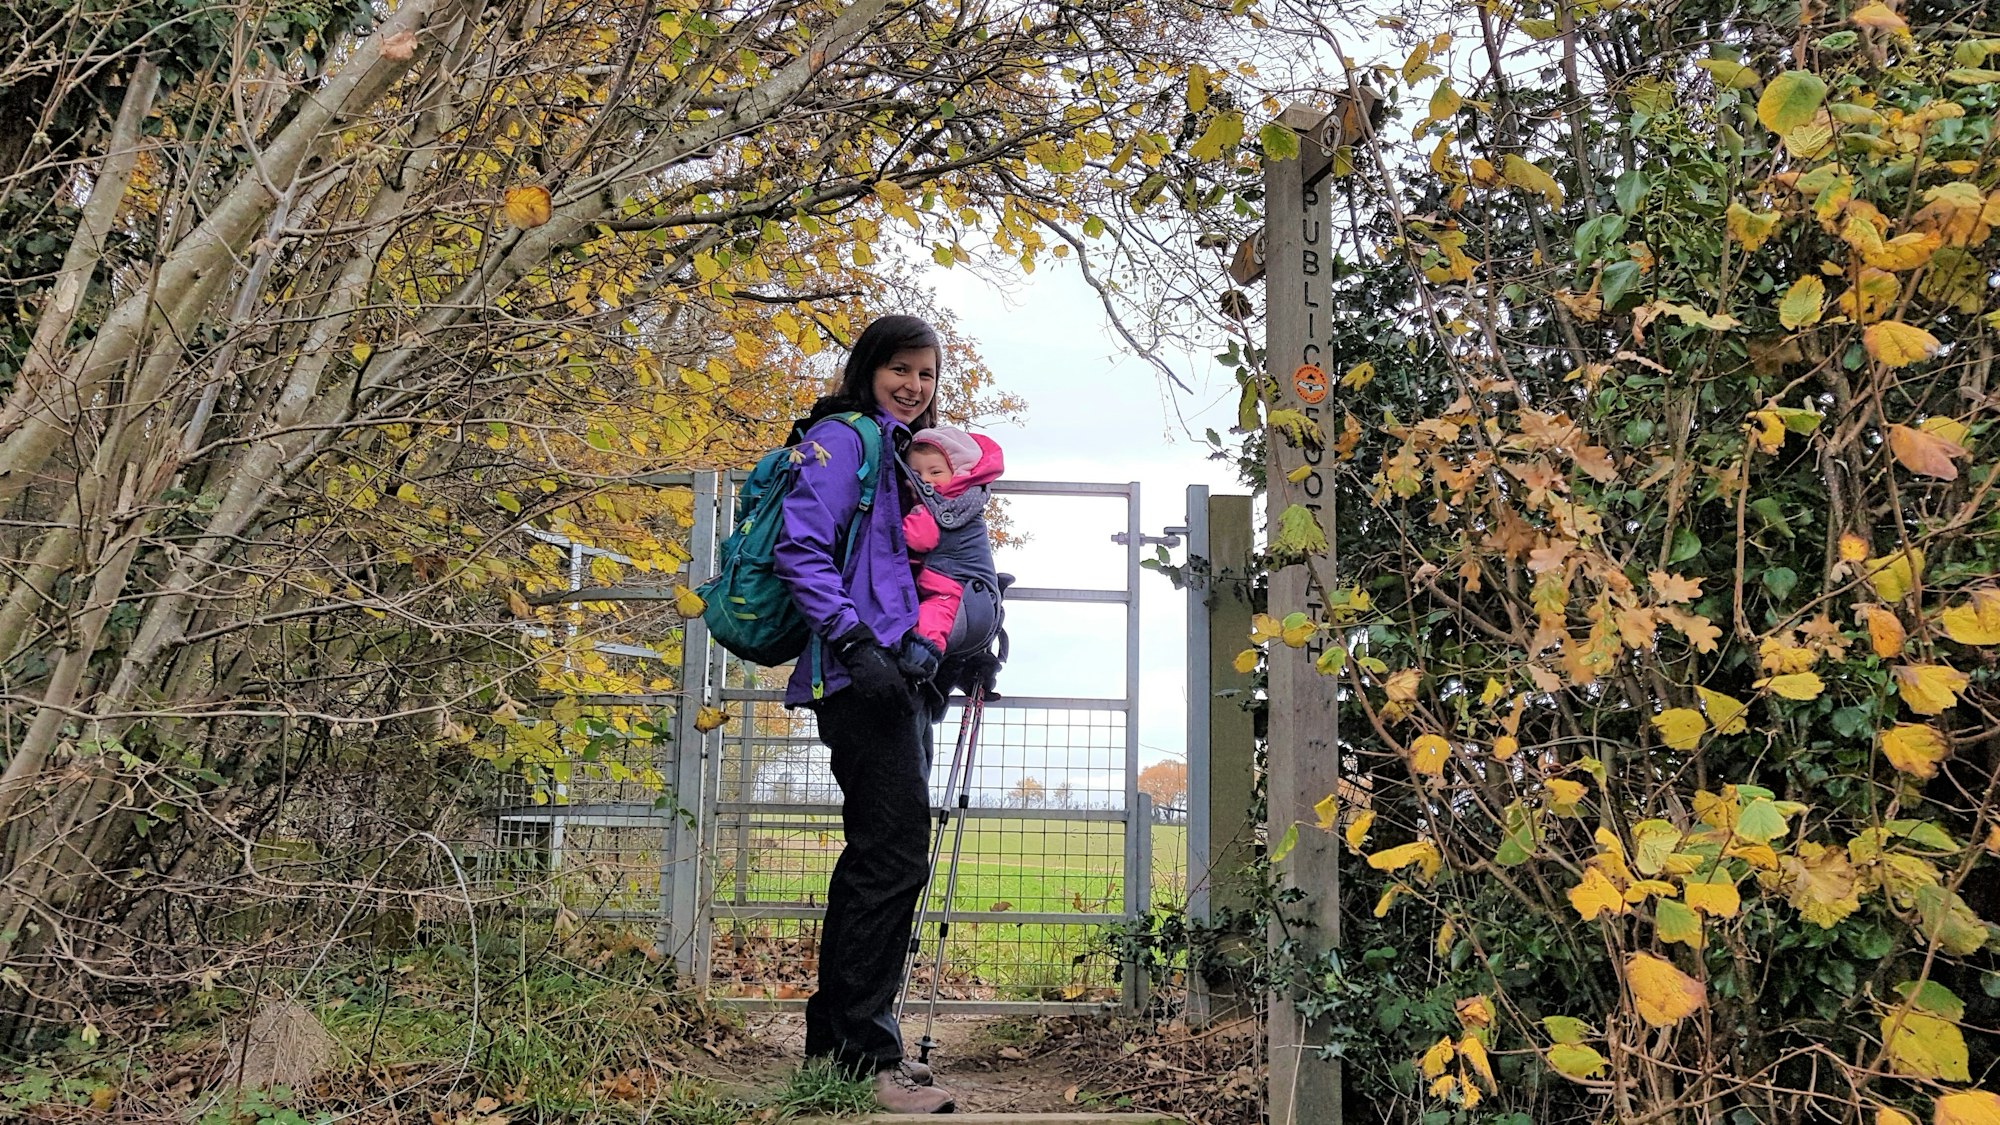 Chloe walked 10km carrying her young daughter Bonnie, raising over £900. "The peace soothes my tired baby and the birds lift my spirits".